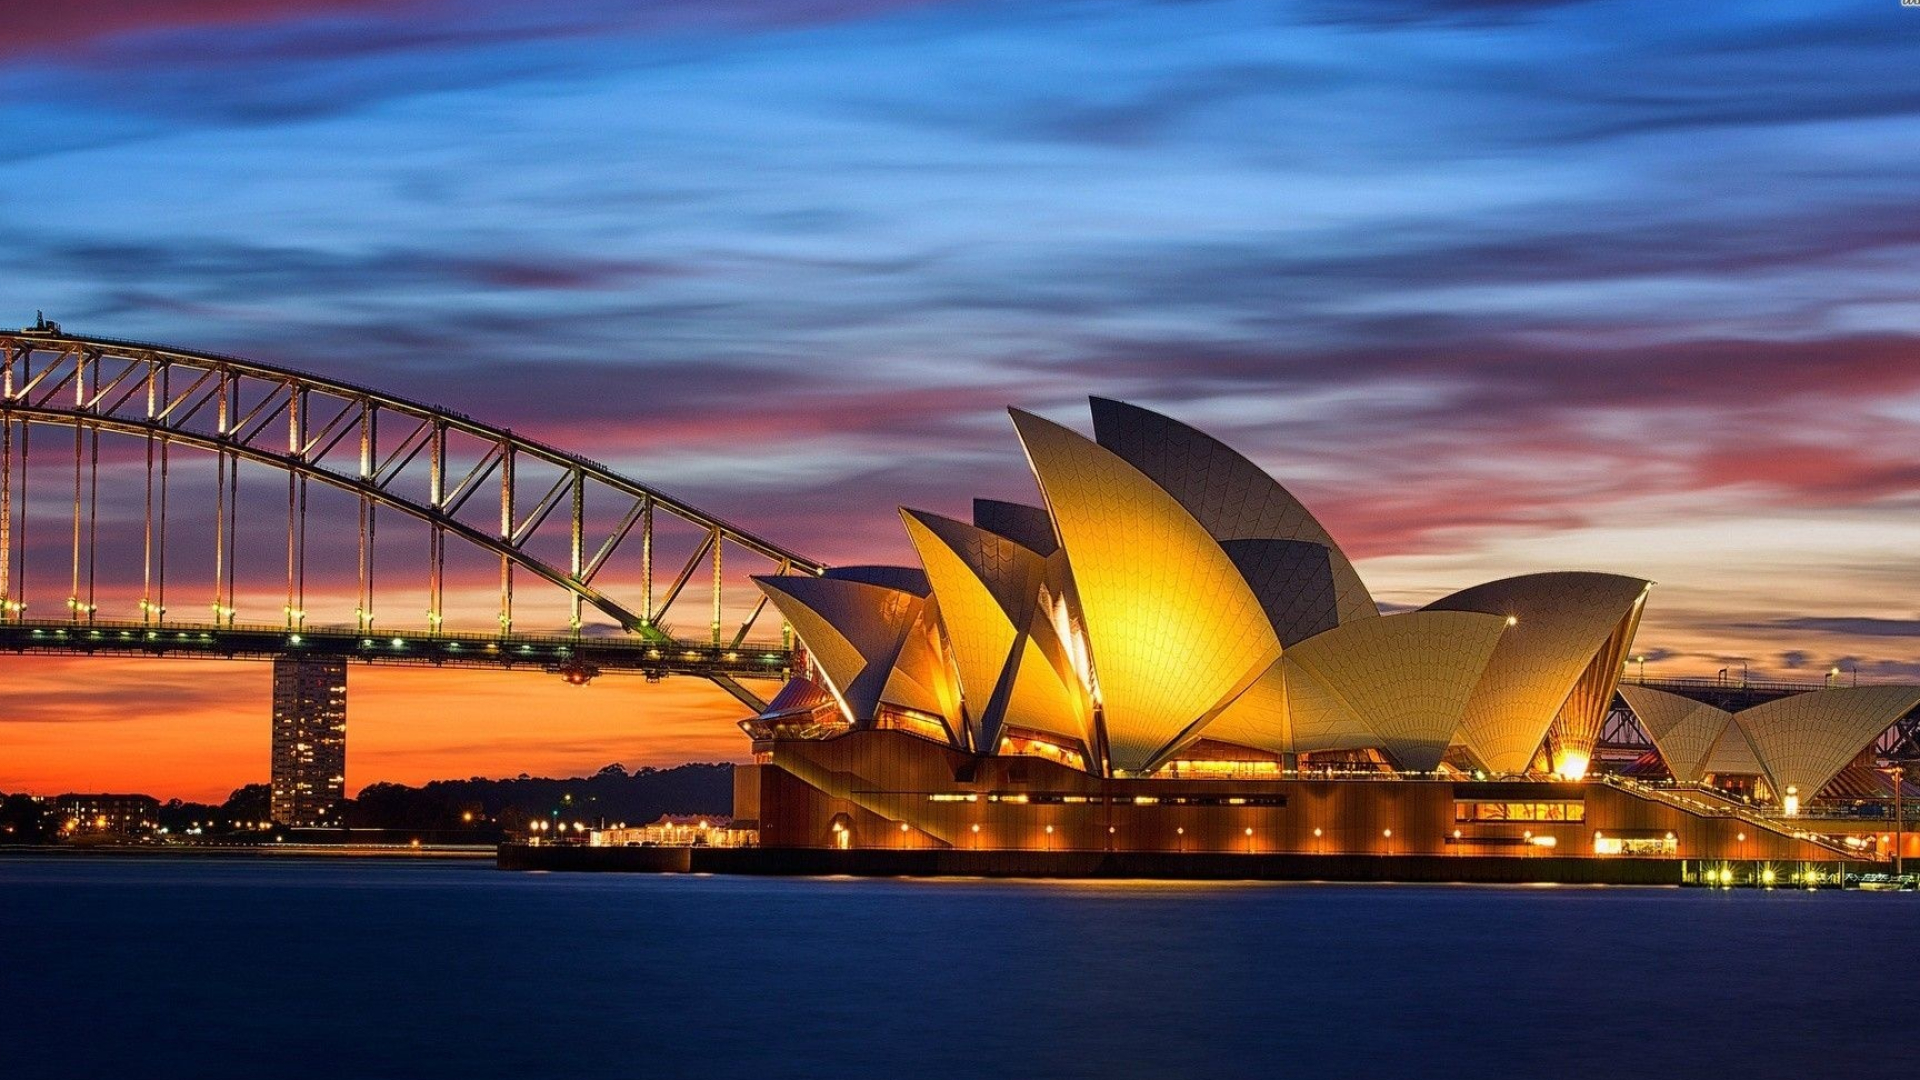 Sydney: Opera House was formally opened by Queen Elizabeth II on 20 October 1973. 1920x1080 Full HD Background.